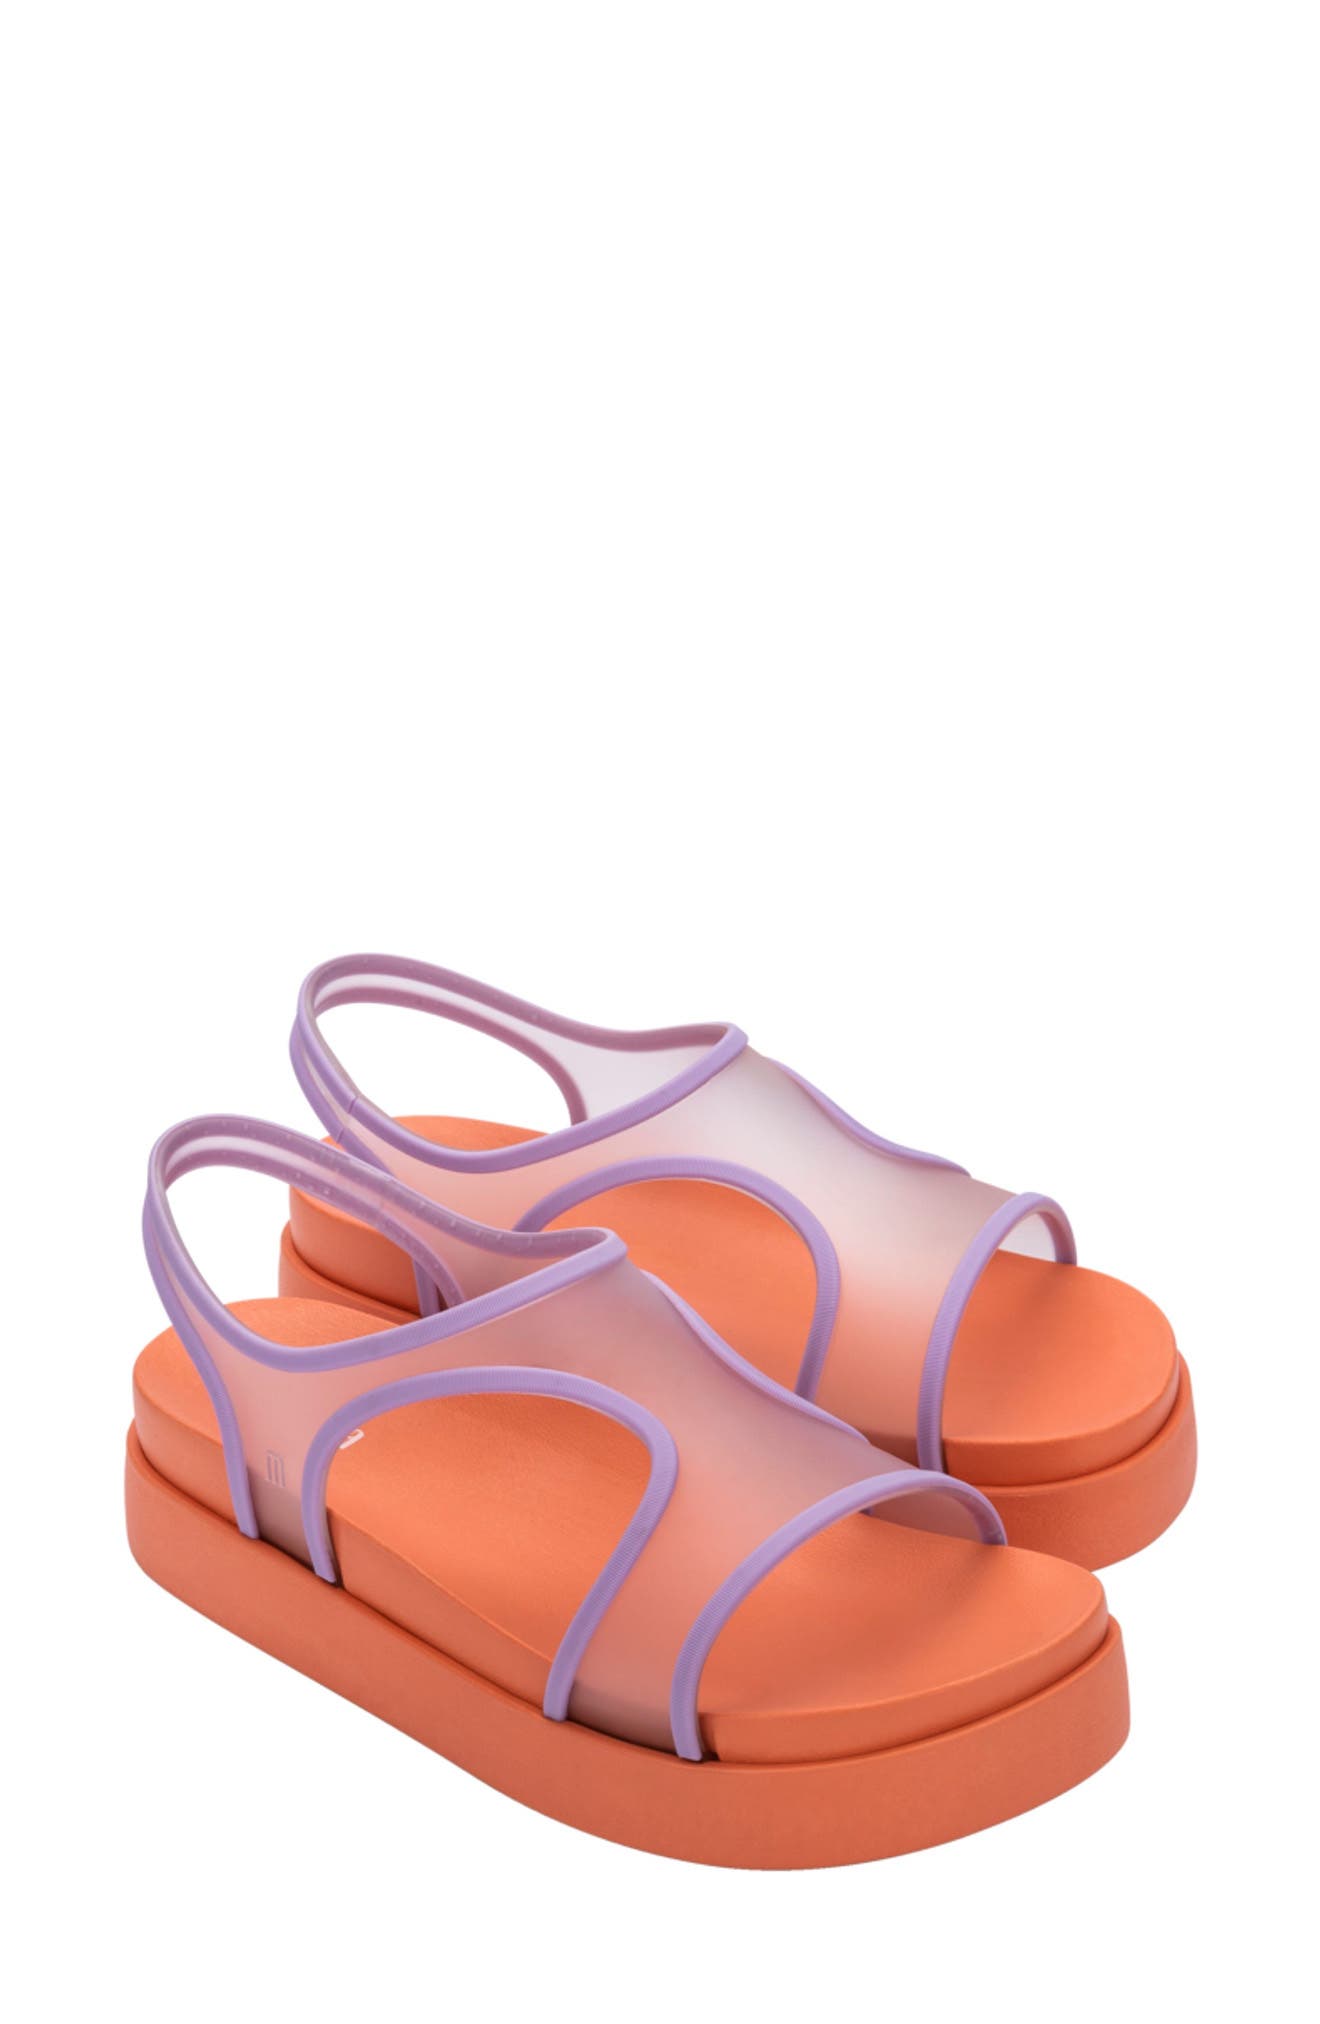 A Classic from Our Childhood UK 0.5 to 13 / EU 32 to 48 in Various Models and Colour Variations AM188 Plastic PVC Sandals/Rubber Men and Children Unisex Water Sandals for Women